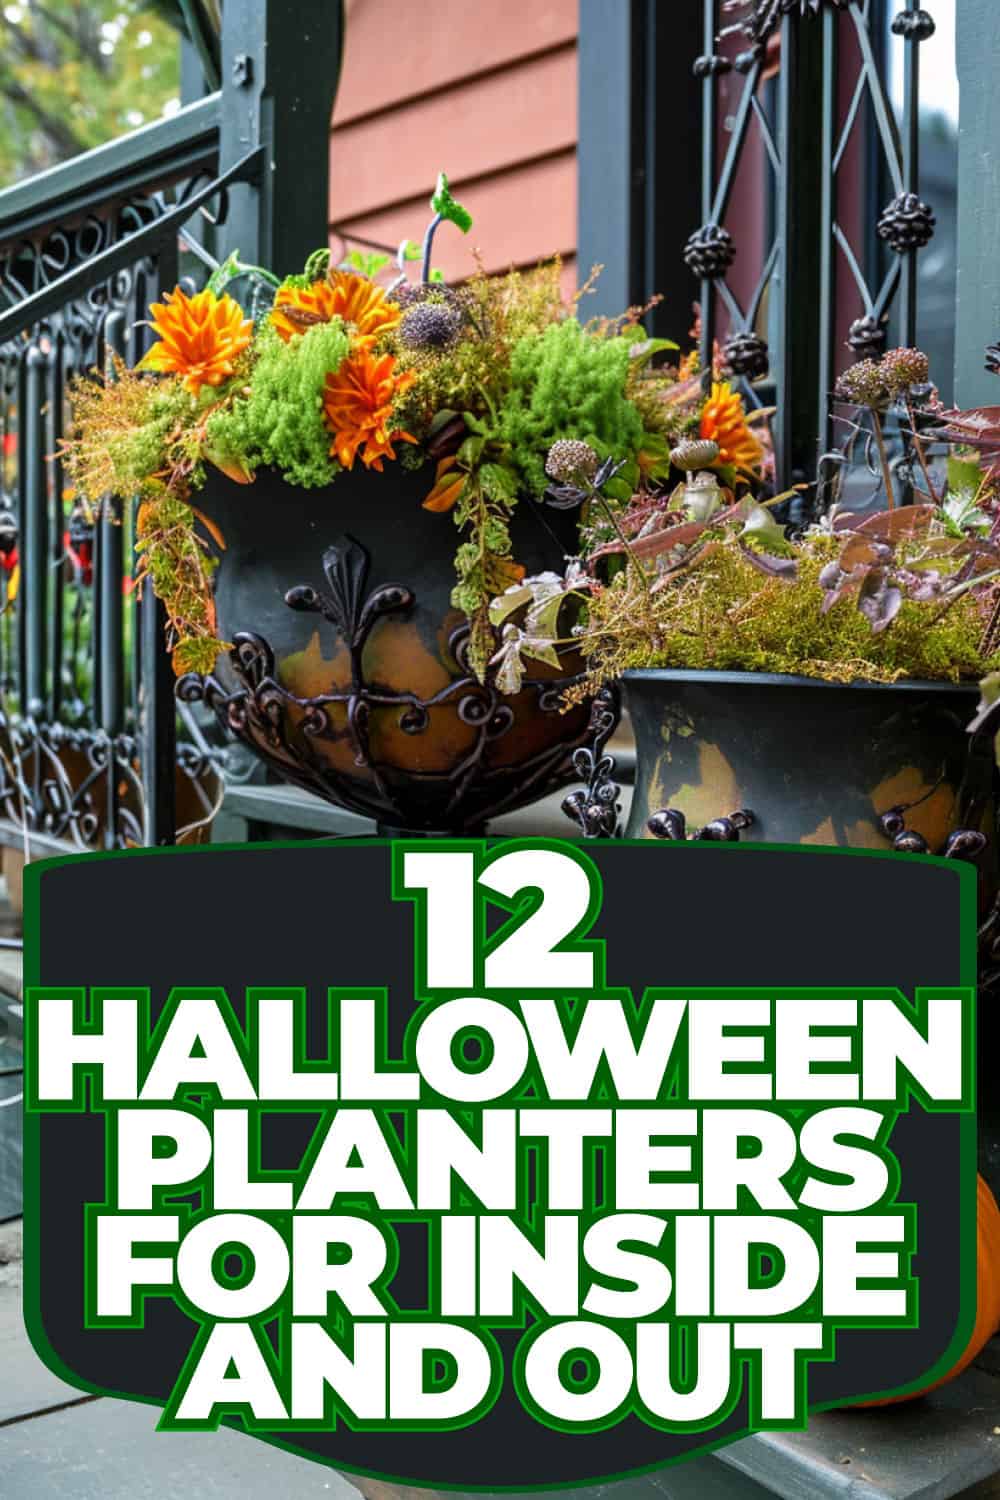 12 Halloween Planters For Inside And Out